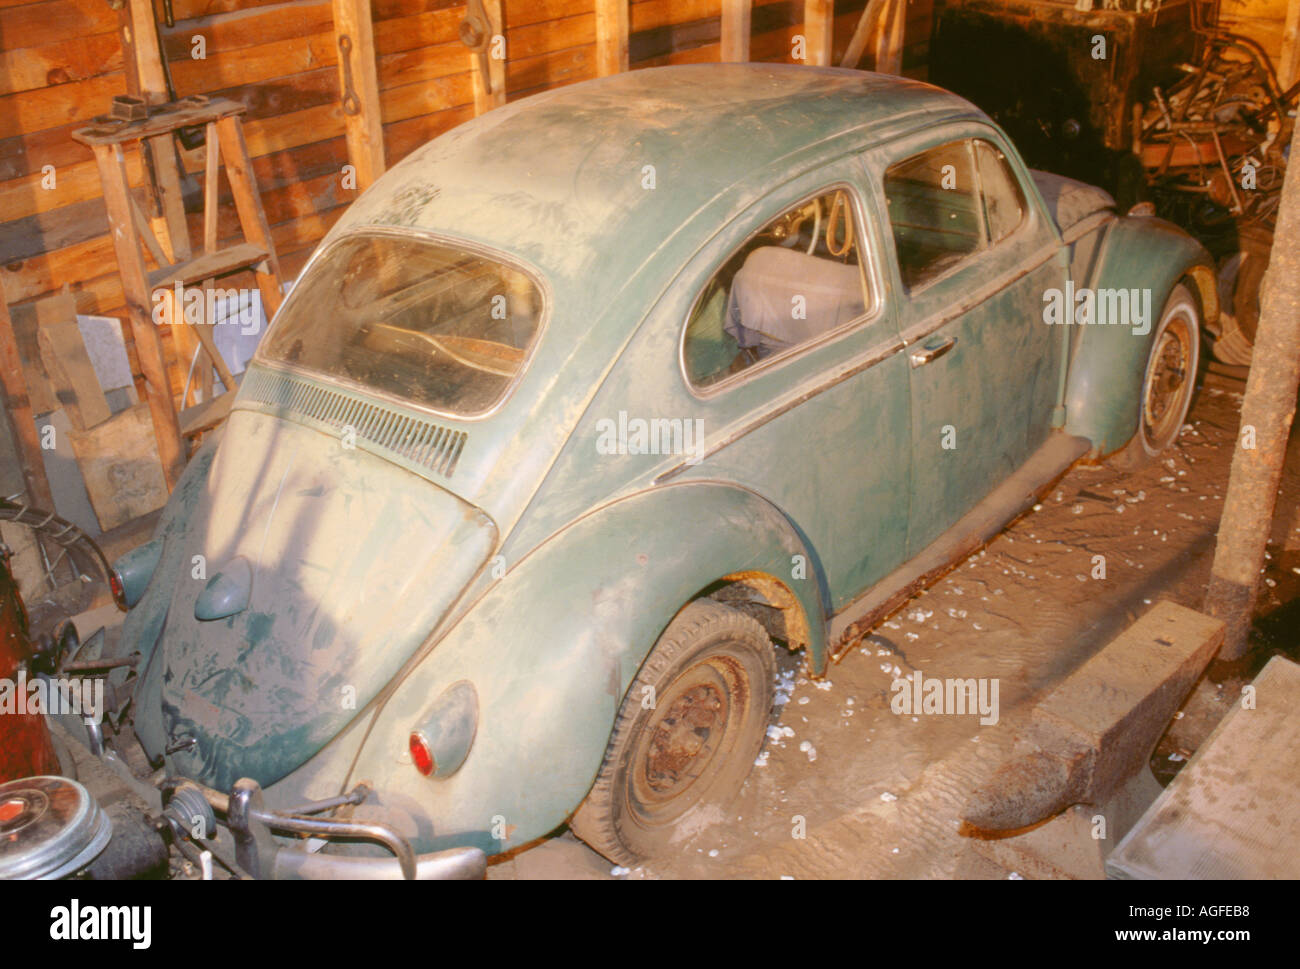 153 Rusty Barn Finds Images, Stock Photos, 3D objects, & Vectors